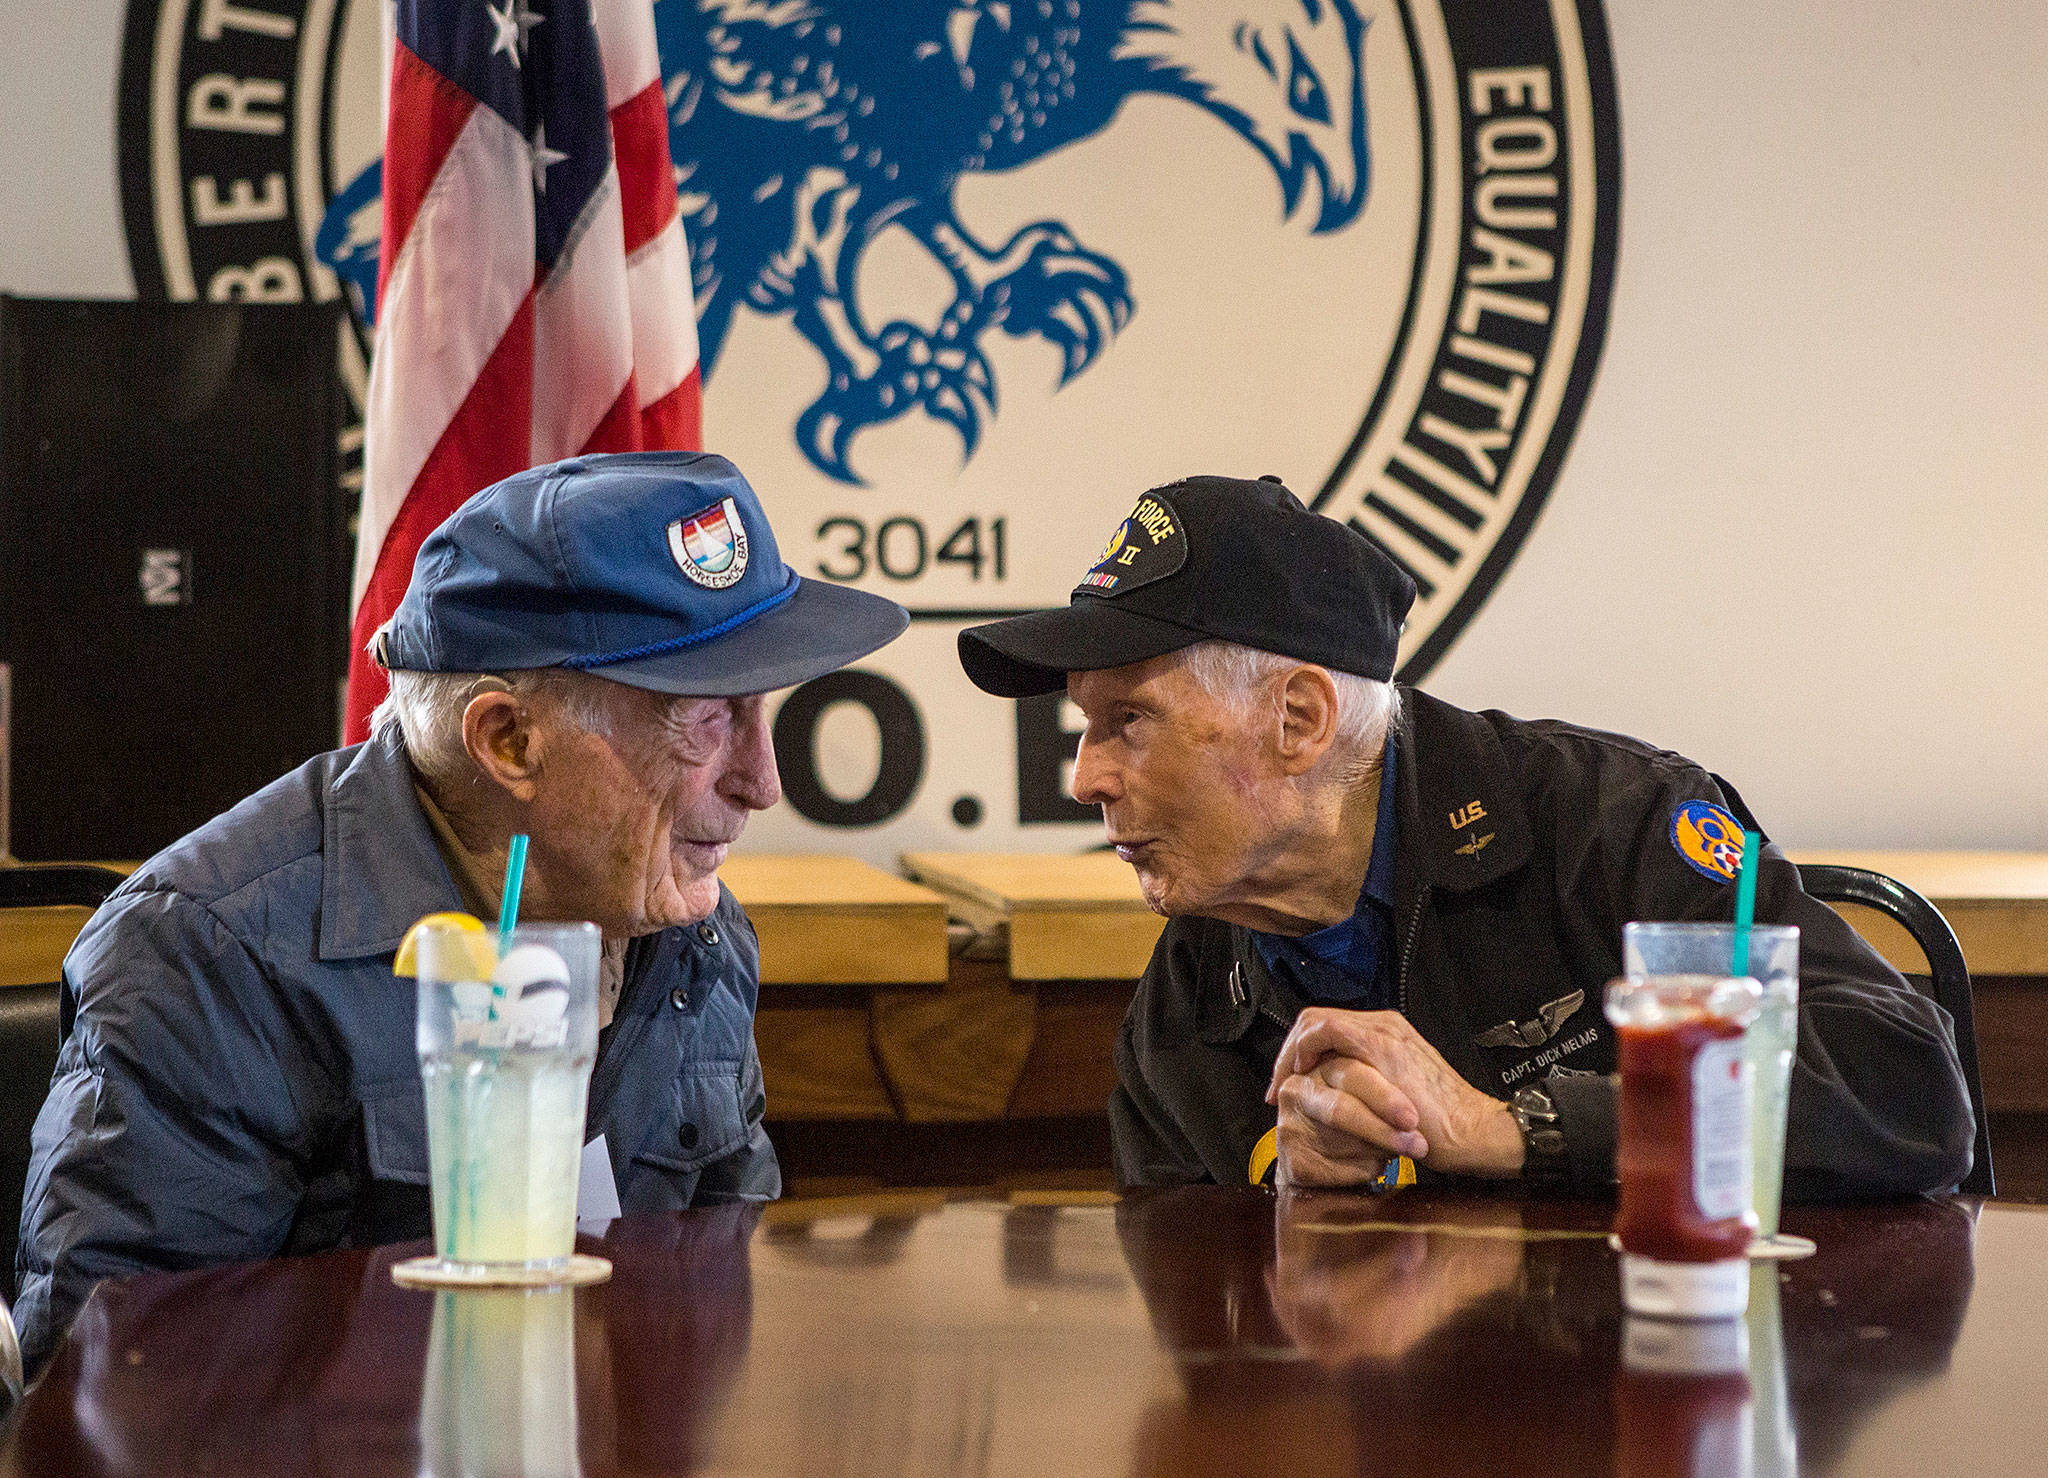 World War II veterans Buck Weaver, 100 (left), and Dick Nelms, 95, meet each other Thursday and chat for the first time at the Stanwood Fraternal Order of Eagles. (Olivia Vanni / The Herald)